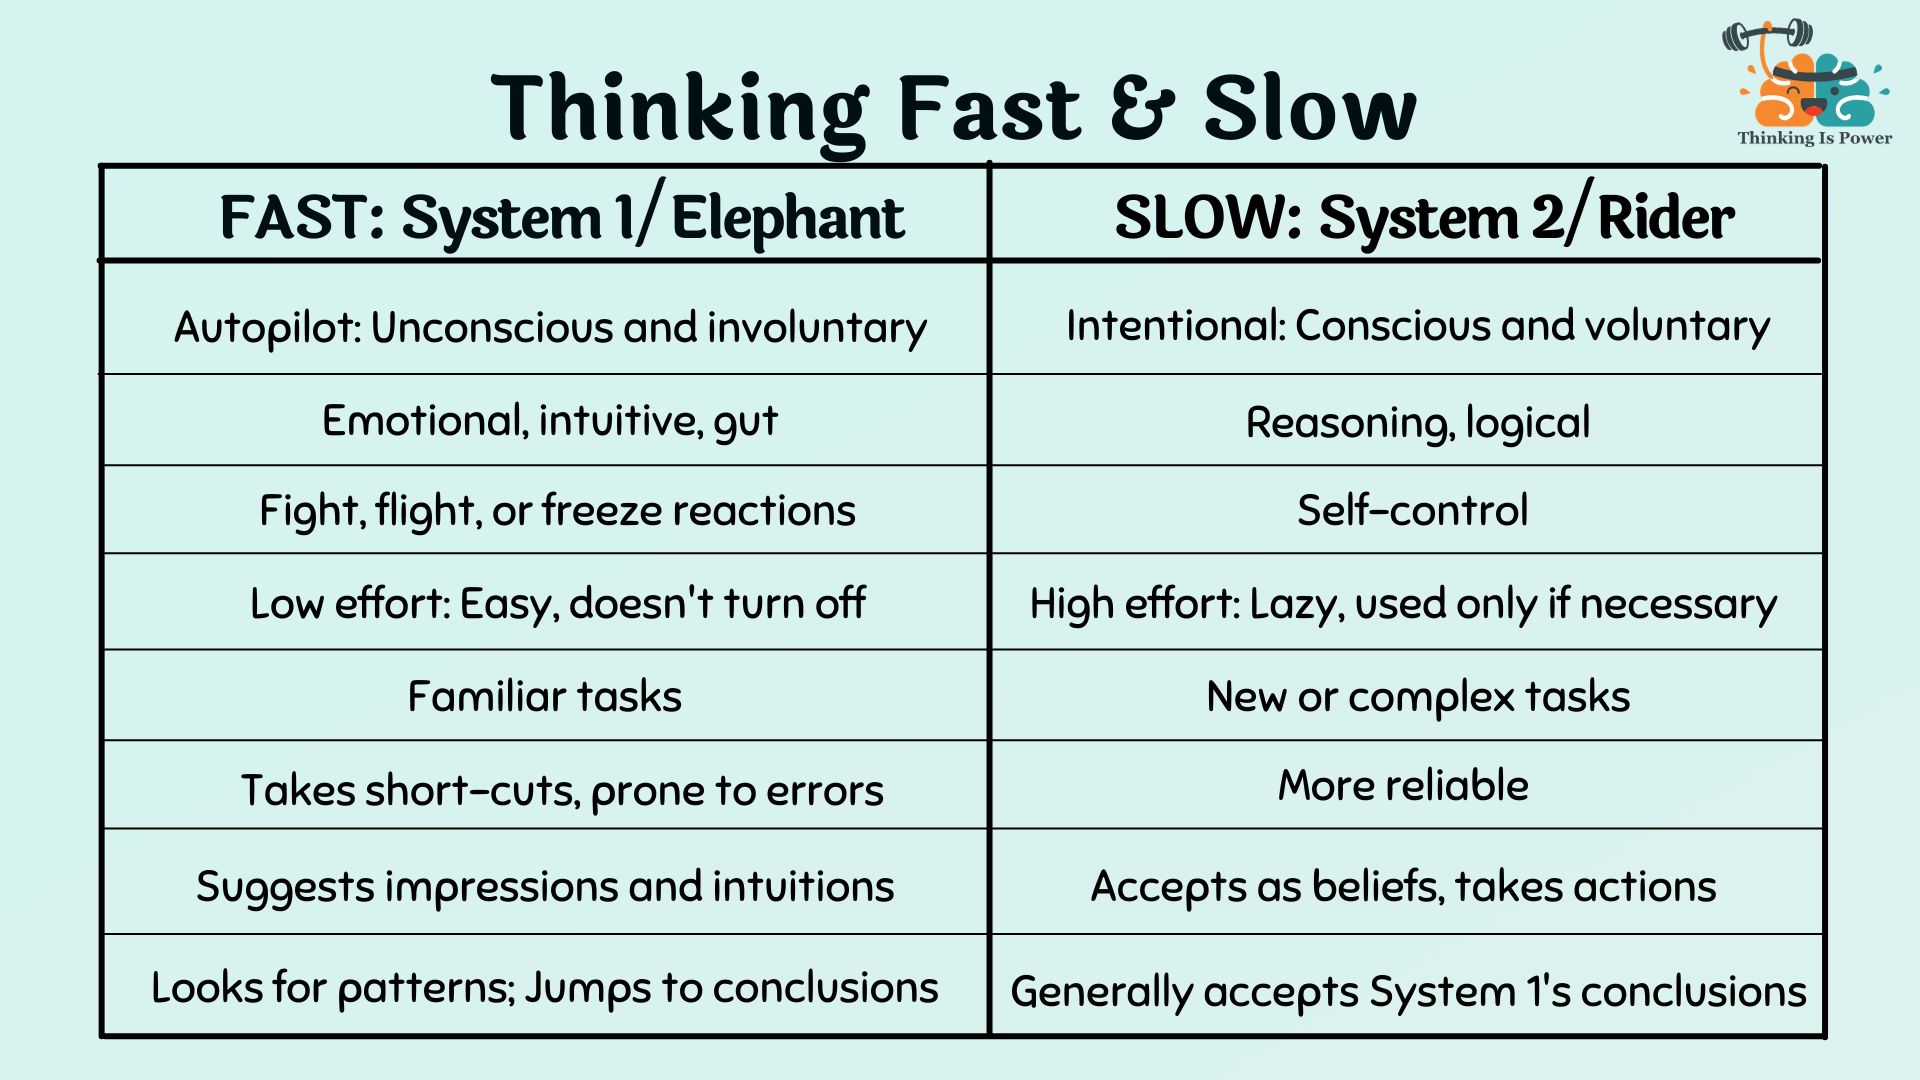 Thinking fast and slow. System 1 is the elephant. It's fast, on autopilot, unconscious and involuntary. It's emotional, intuitive, gut reactions. Fight, fight, or freeze. Low effort, doesn't turn off. Used for familiar tasks. Takes short-cuts, prone to errors. Suggests impressions and intuitions. Looks for patterns and jumps to conclusions. System 2 is the rider. It's slow and intentional. Conscious and voluntary. Reasoning, logical, self-control. High effort and lazy, used only if necessary. Used for new or complex tasks. Is more reliable. Accepts system 1's beliefs and conclusions.